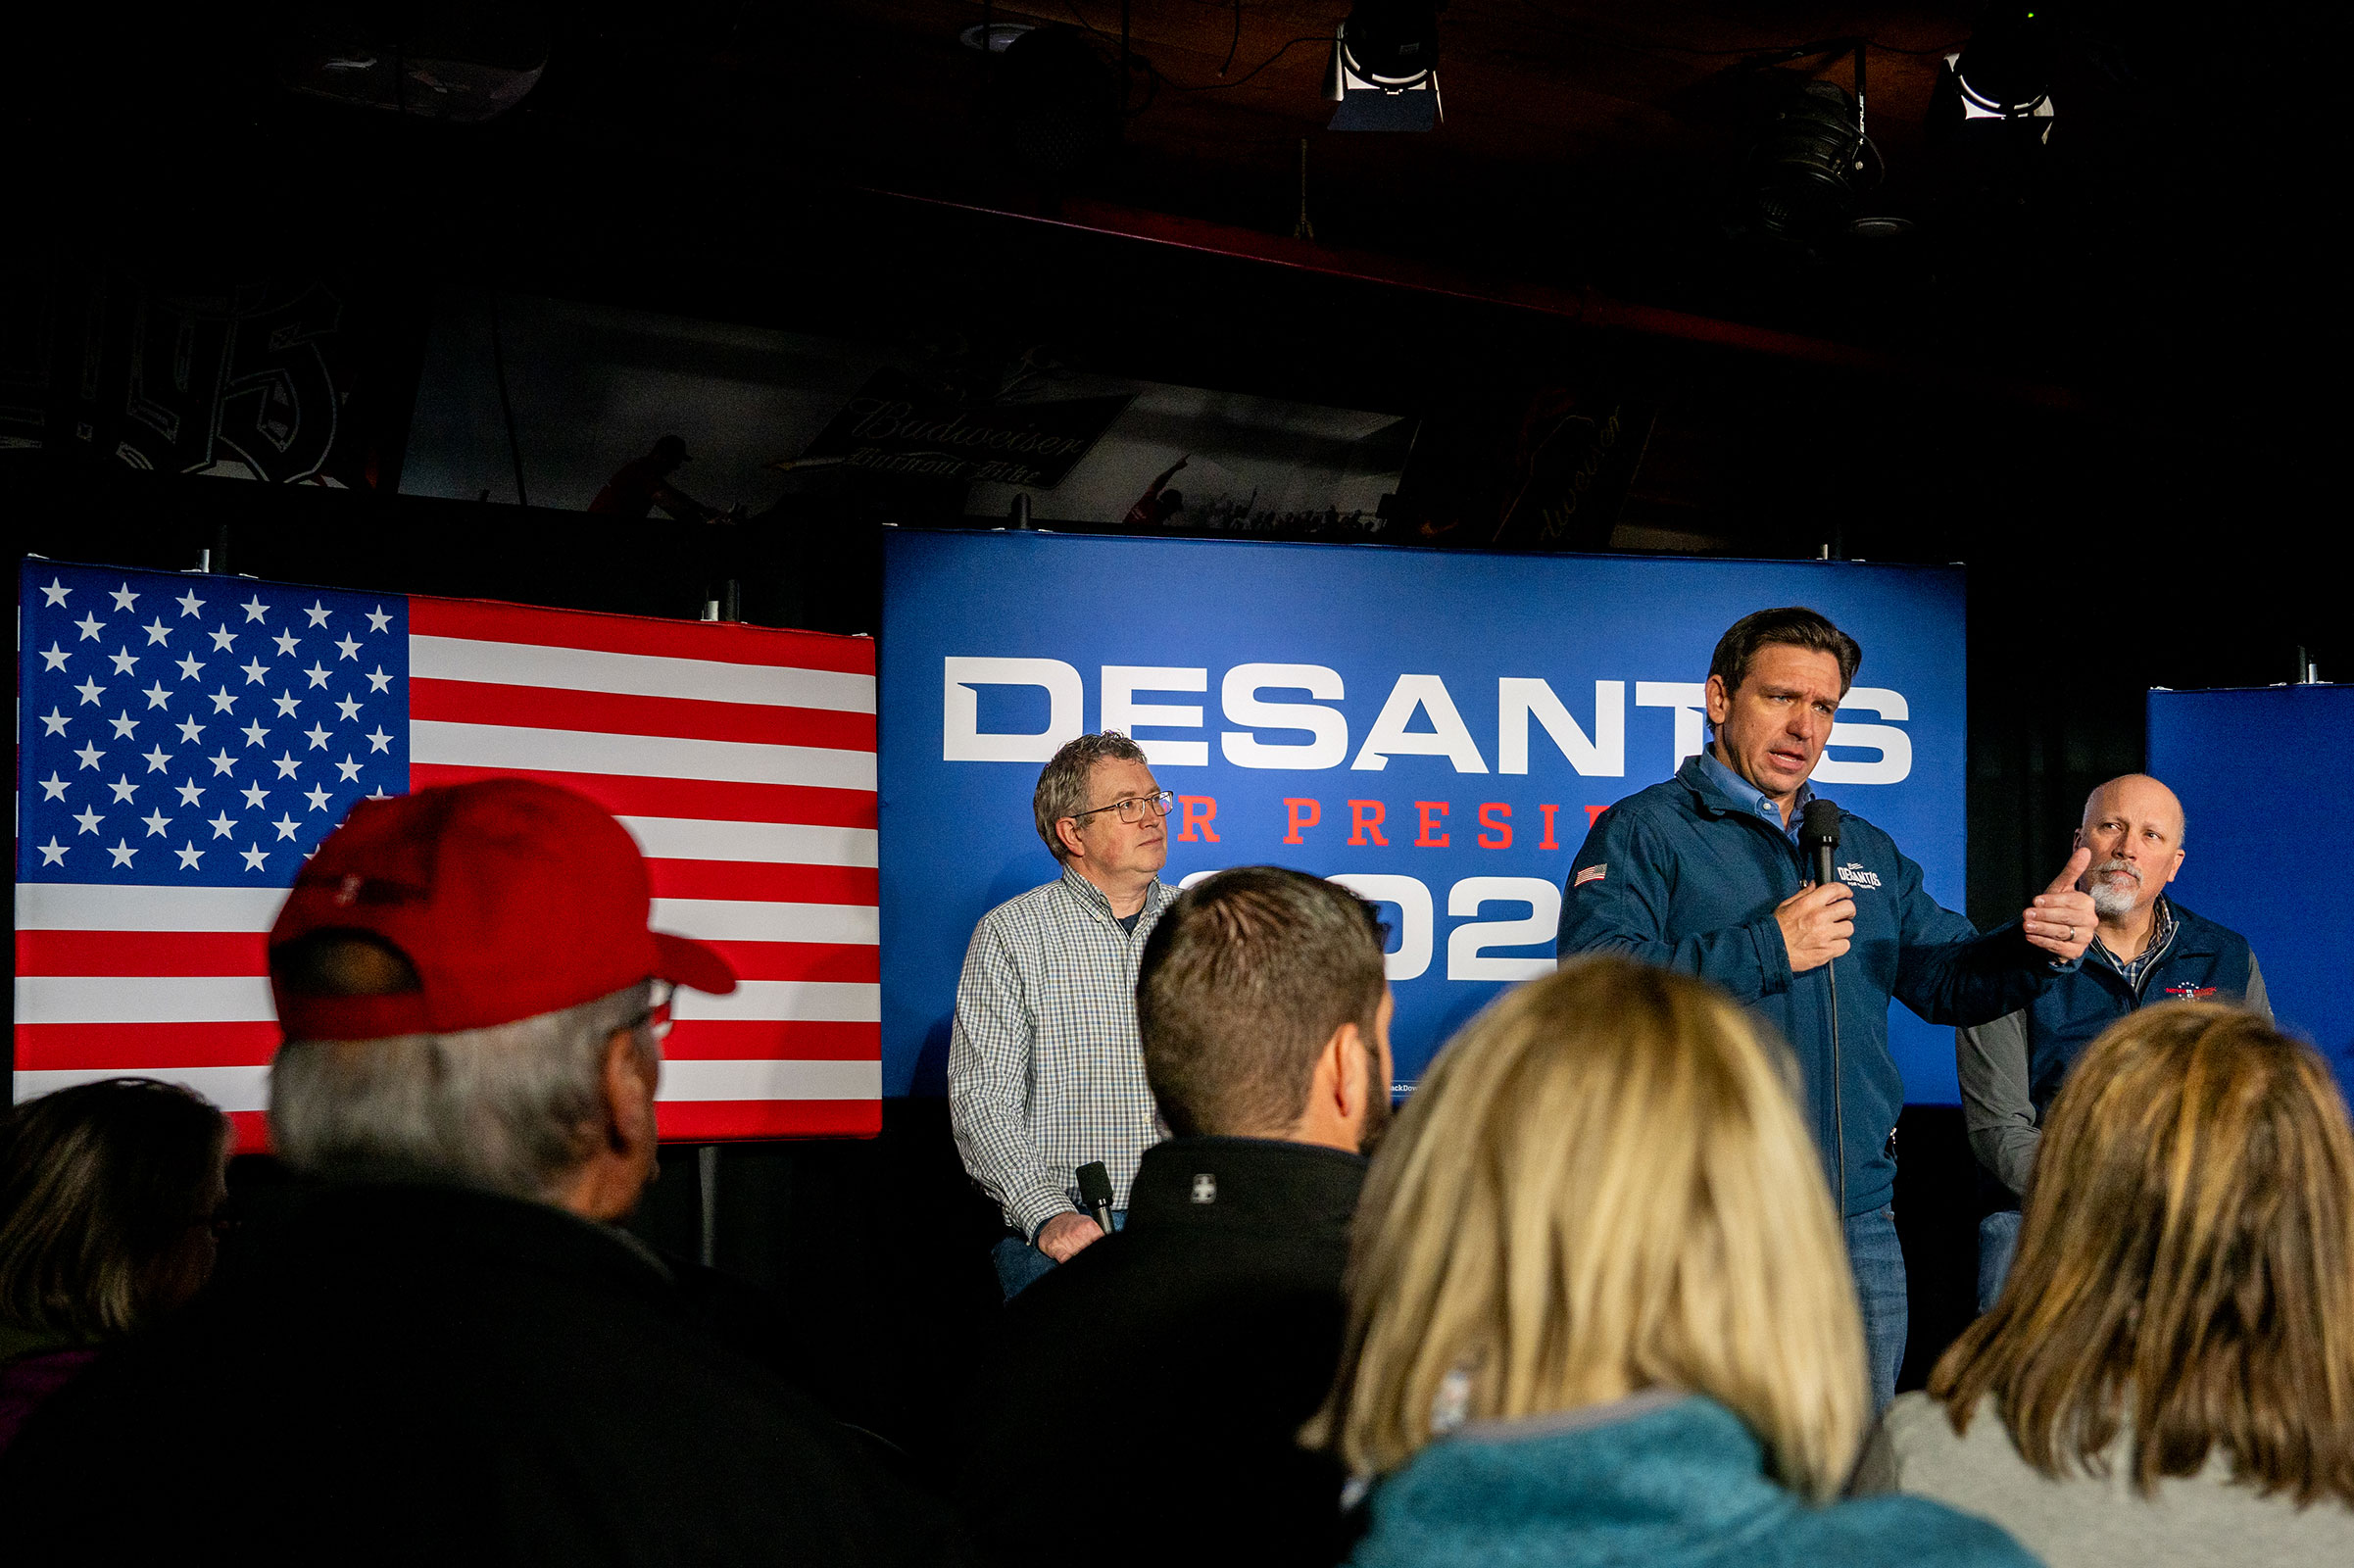 Florida Gov. Ron DeSantis speaks to supporters at Wally's bar on January 17, in Hampton, New Hampshire.